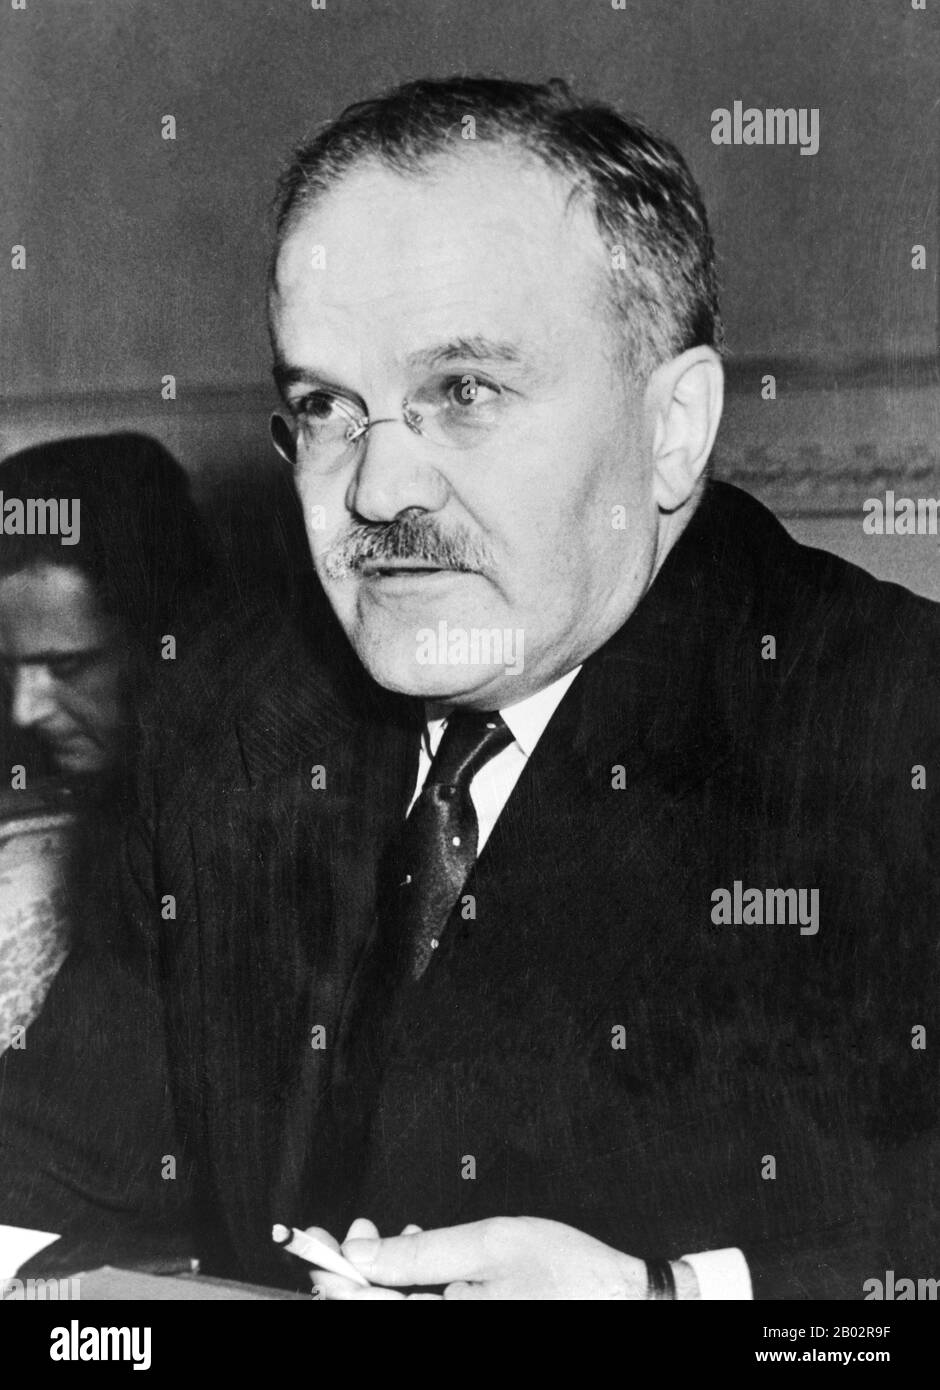 Vyacheslav Mikhailovich Molotov (9 March 1890 – 8 November 1986) was a Soviet politician and diplomat, an Old Bolshevik, and a leading figure in the Soviet government from the 1920s, when he rose to power as a protégé of Joseph Stalin.  Molotov served as Chairman of the Council of People's Commissars (Premier) from 1930 to 1941, and as Minister of Foreign Affairs from 1939 to 1949 and from 1953 to 1956. He served as First Deputy Premier from 1942 to 1957, when he was dismissed from the Presidium of the Central Committee by Nikita Khrushchev.  He retired in 1961 after several years of obscurity Stock Photo